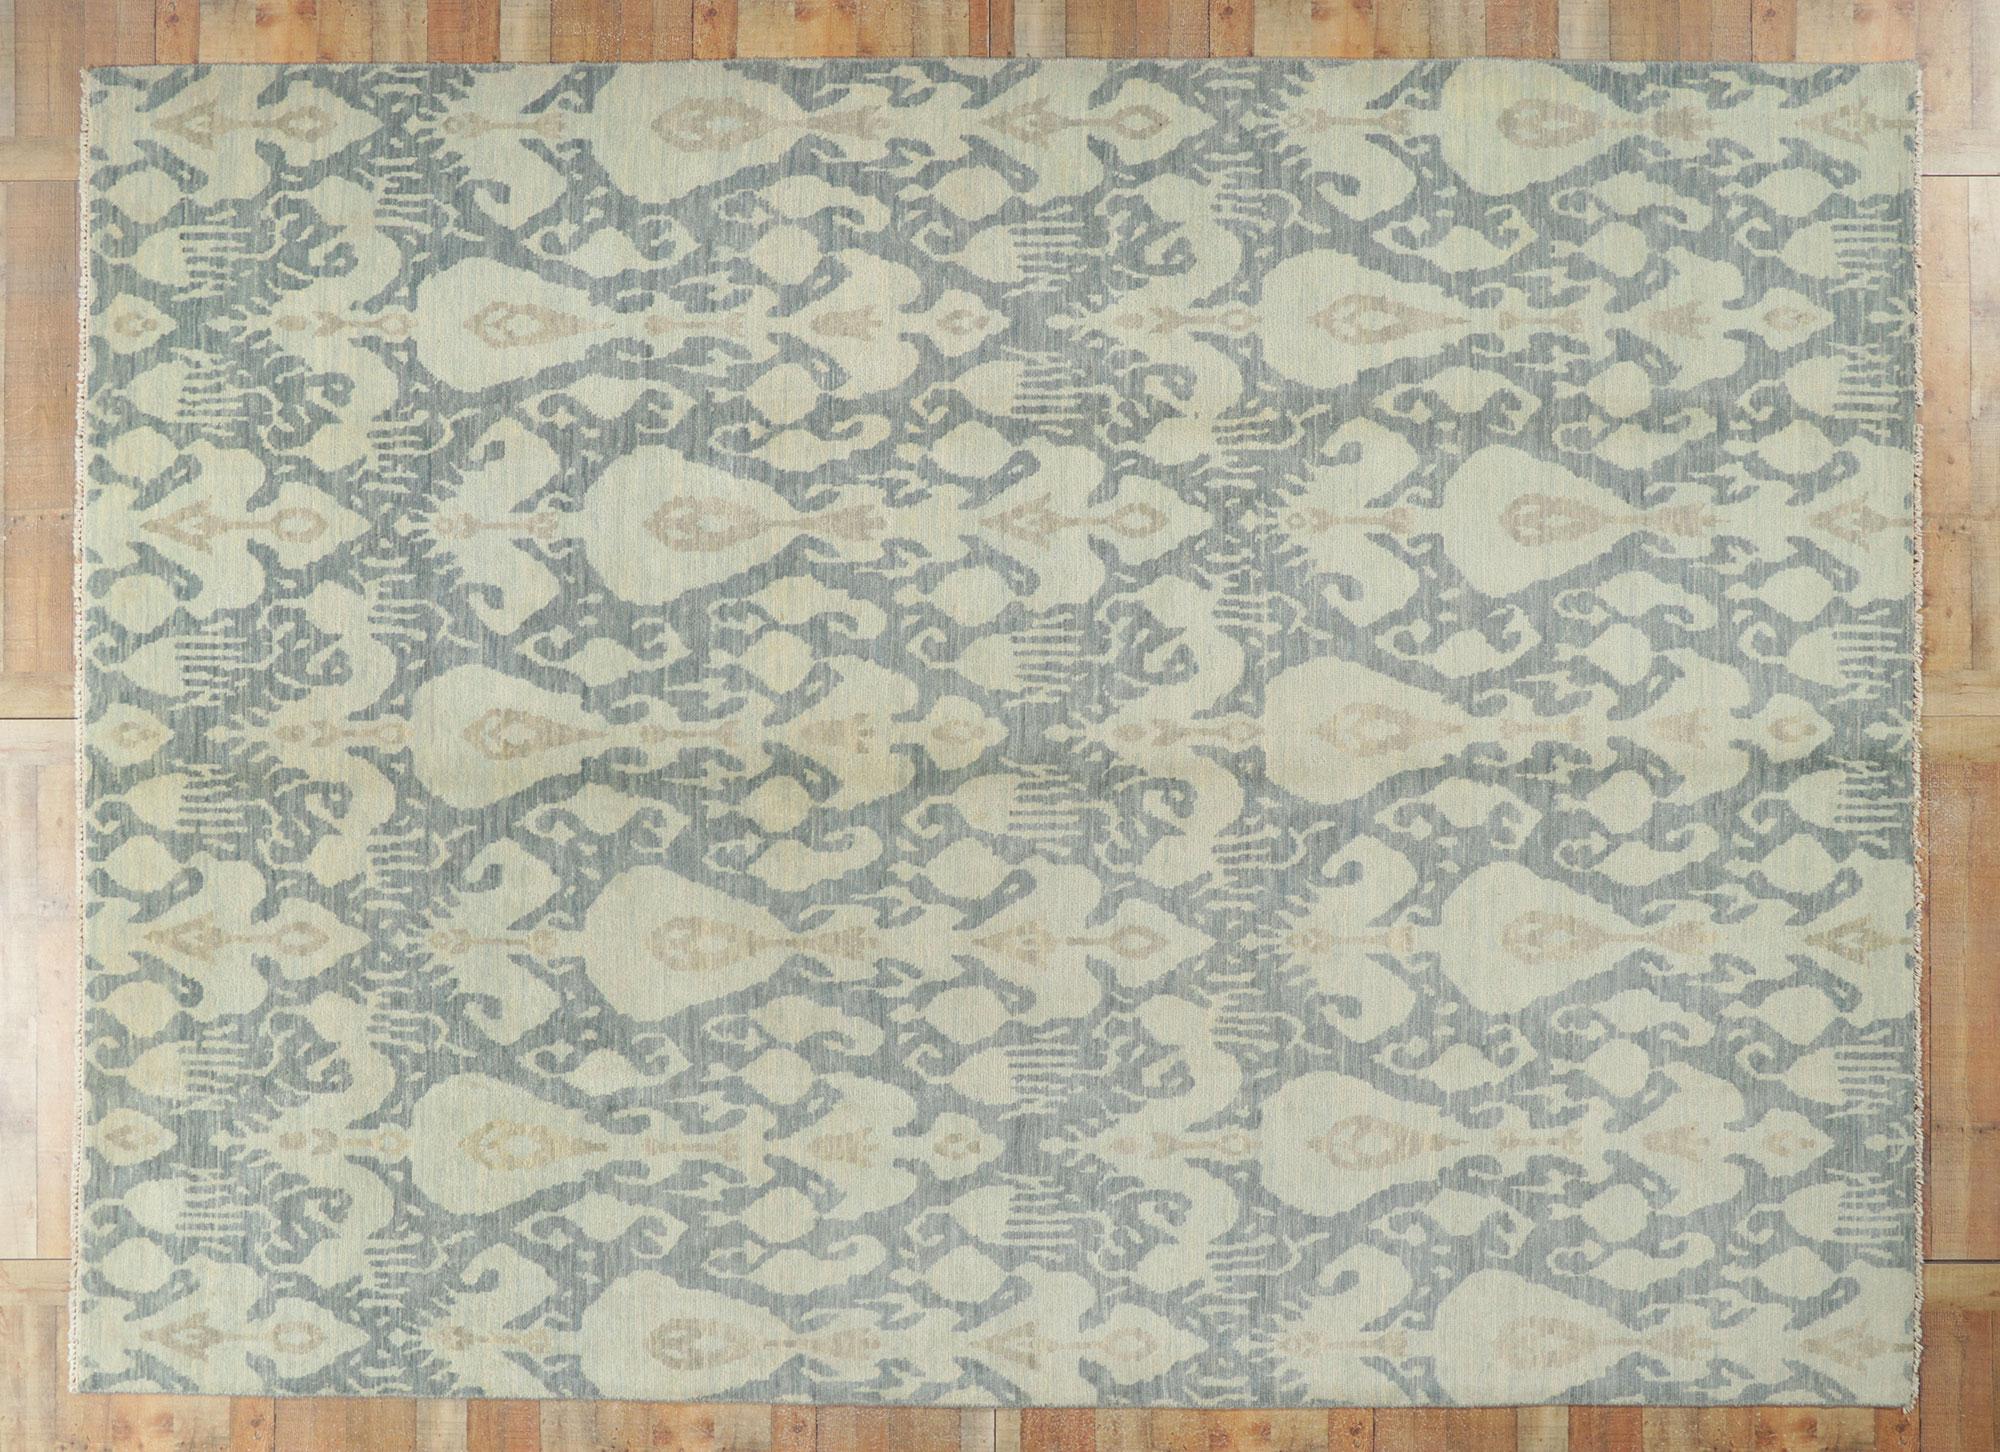 Contemporary New Transitional Area Rug with Ikat Pattern in Soft Blue Earth-Tone Colors For Sale